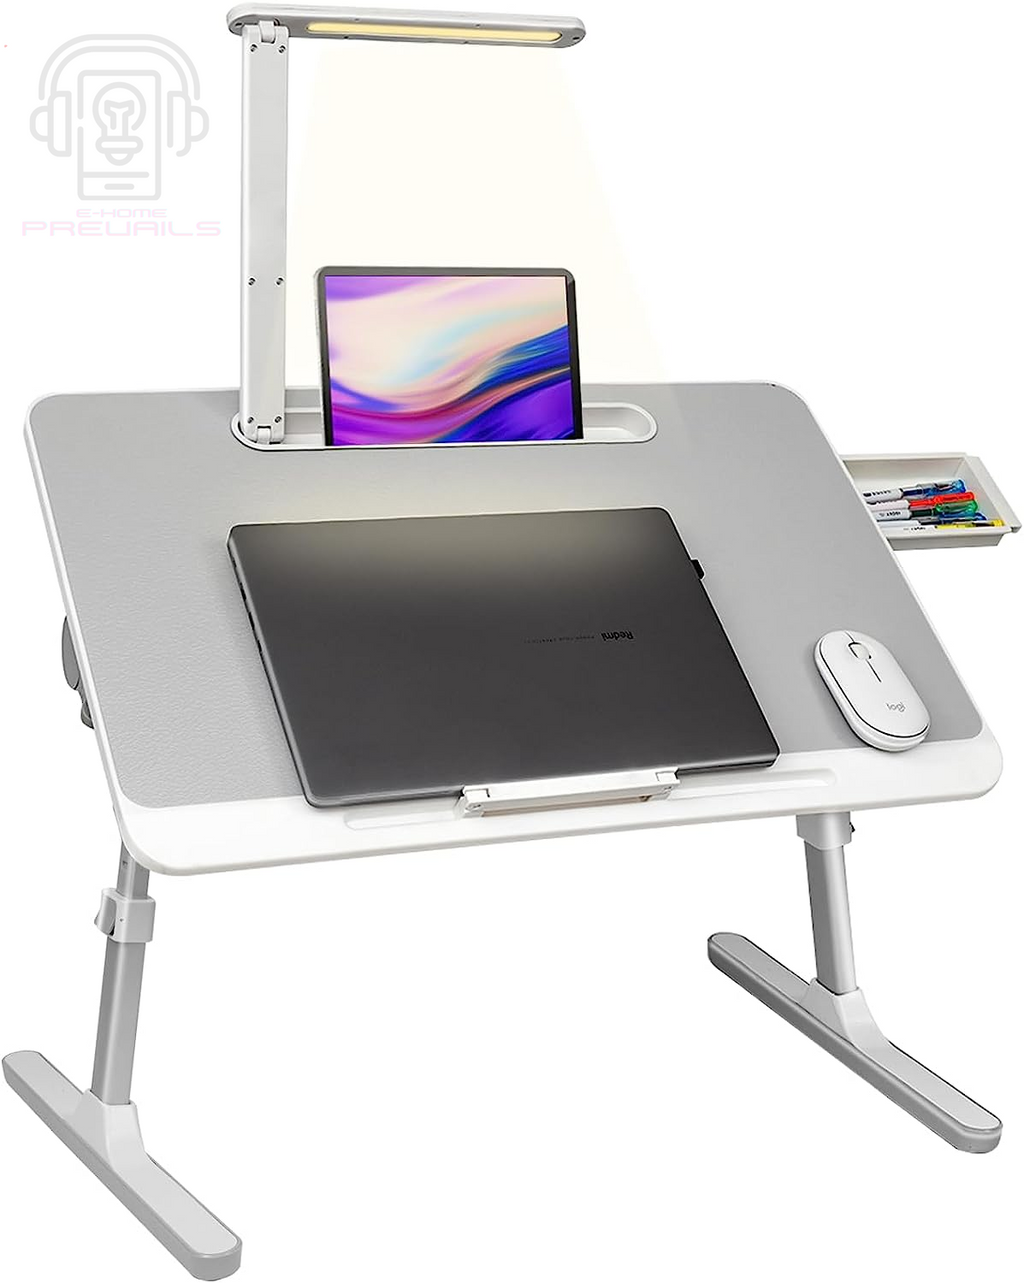 Professional Title: "Adjustable Lap Desk with LED Light, Drawer, and Portable Design for Laptop Use in Bed, Sofa, Study, and Reading"